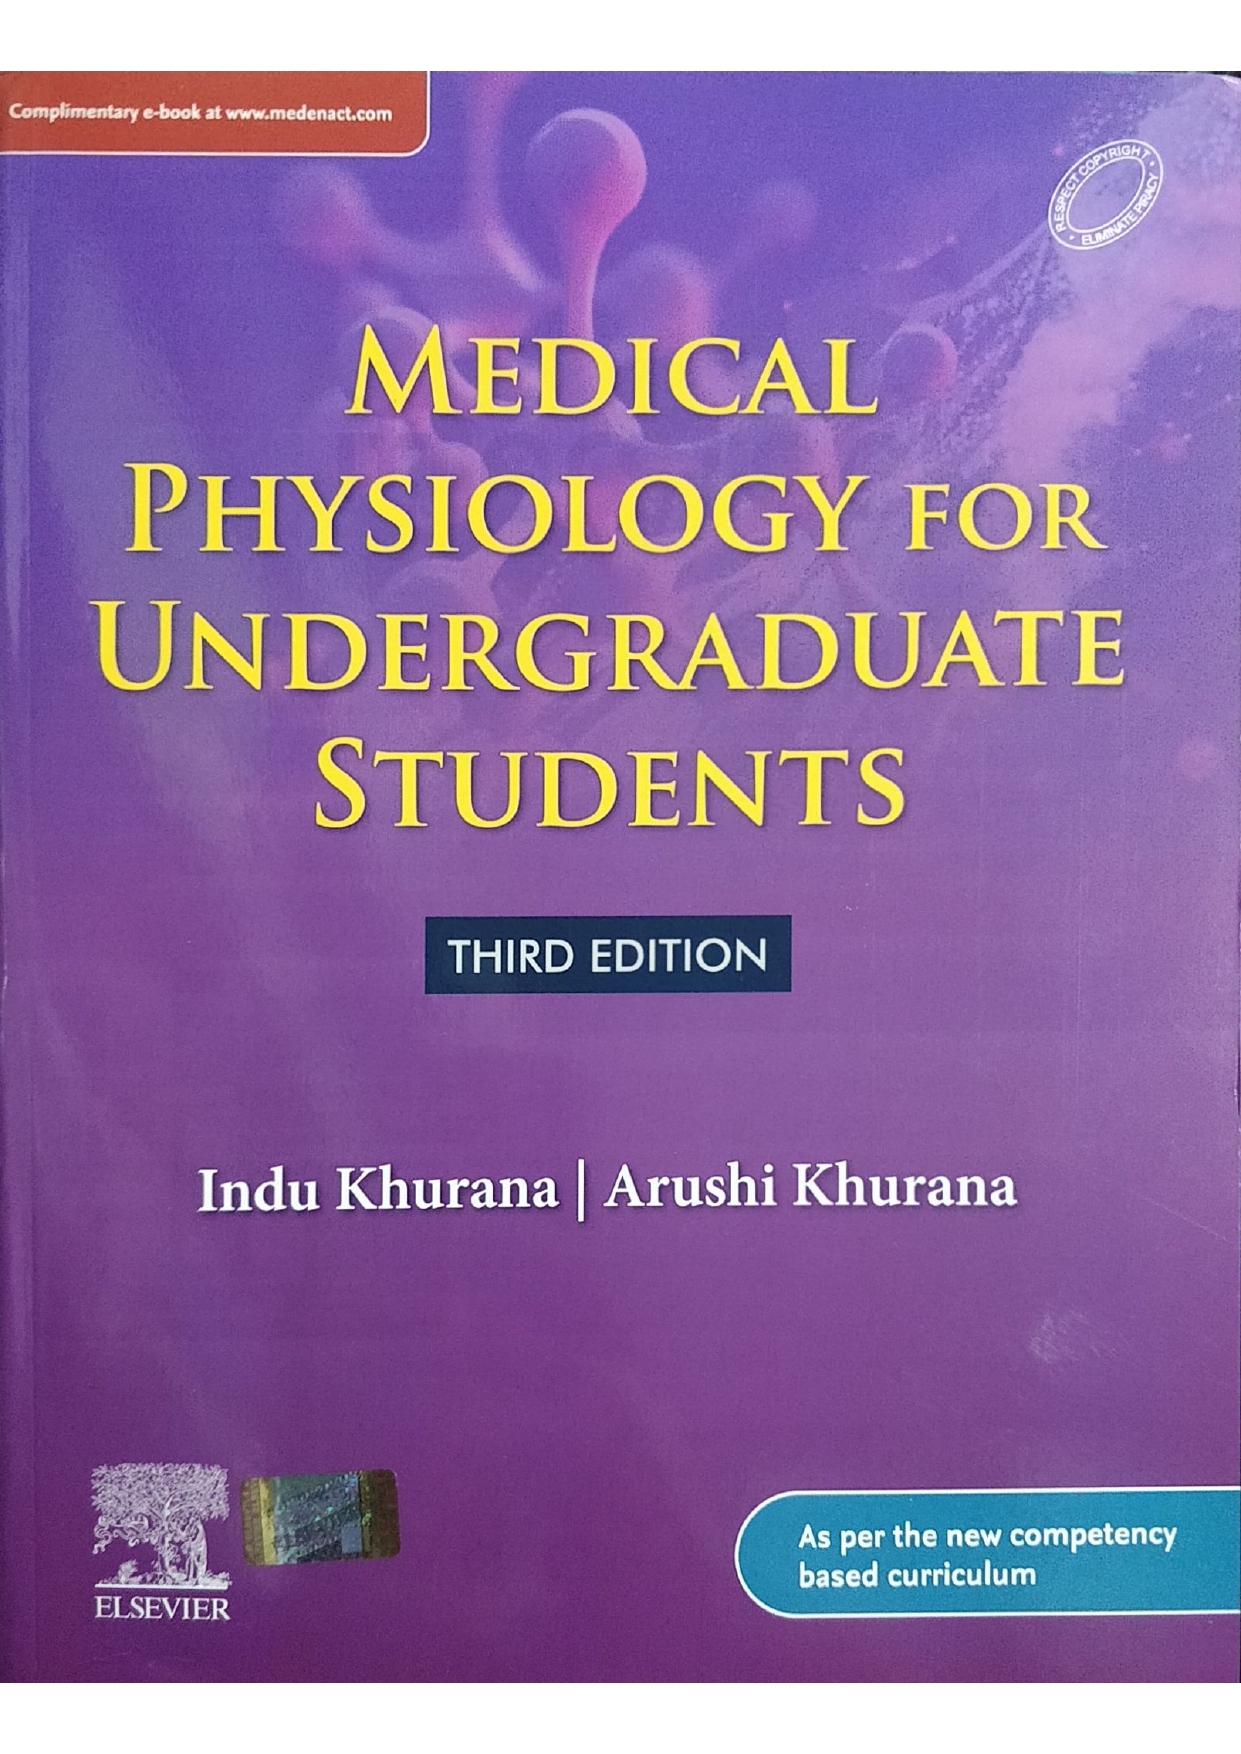 Medical Physiology For Undergraduate Students, 3rd Updated Edition